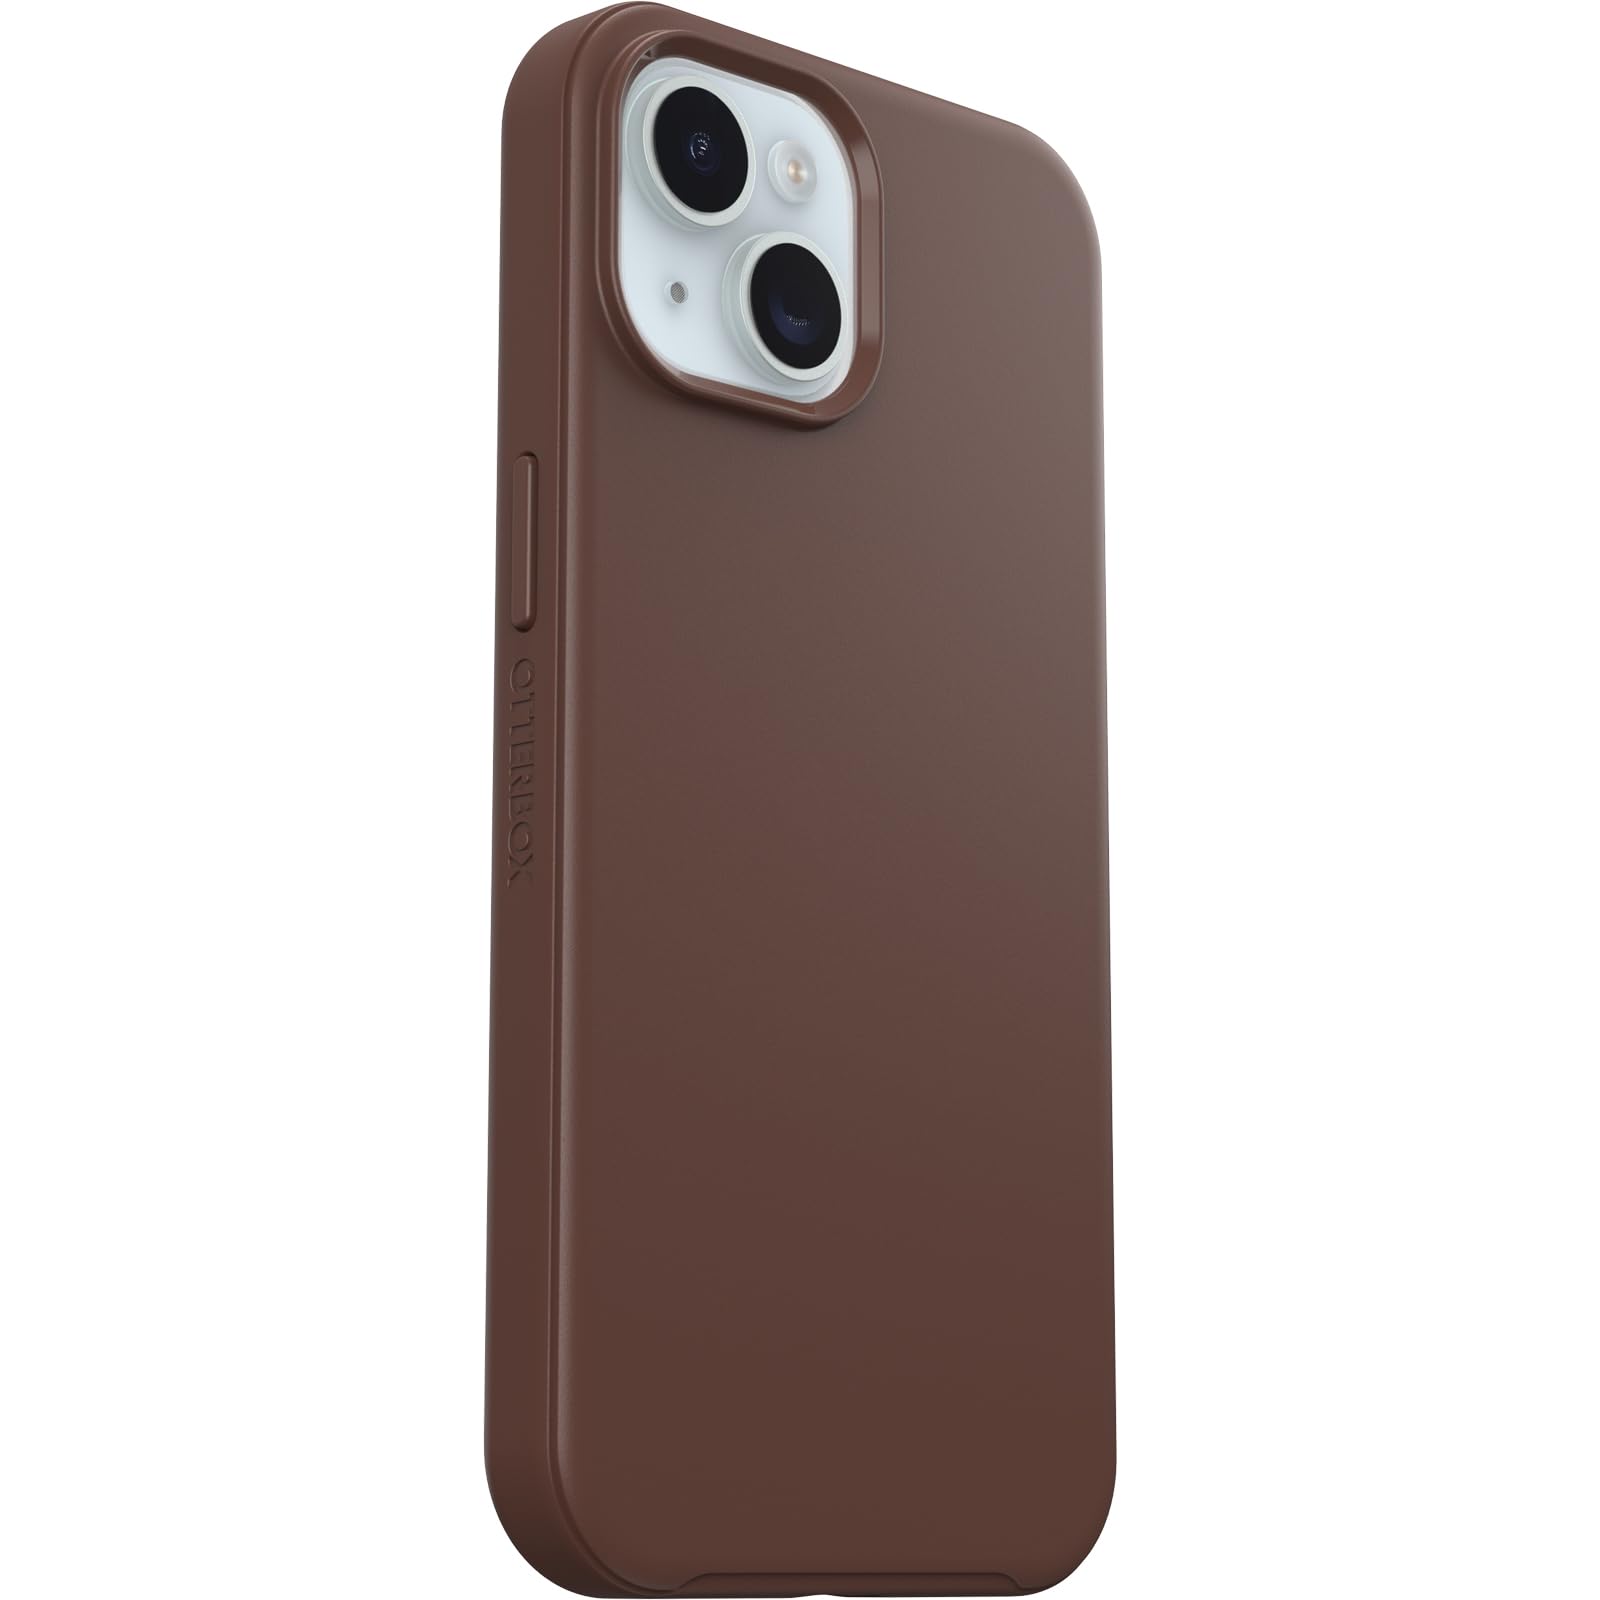 OtterBox iPhone 15, iPhone 14, and iPhone 13 Symmetry Series Case - CHOCOLATE BAR (Brown), snaps to MagSafe, ultra-sleek, raised edges protect camera & screen